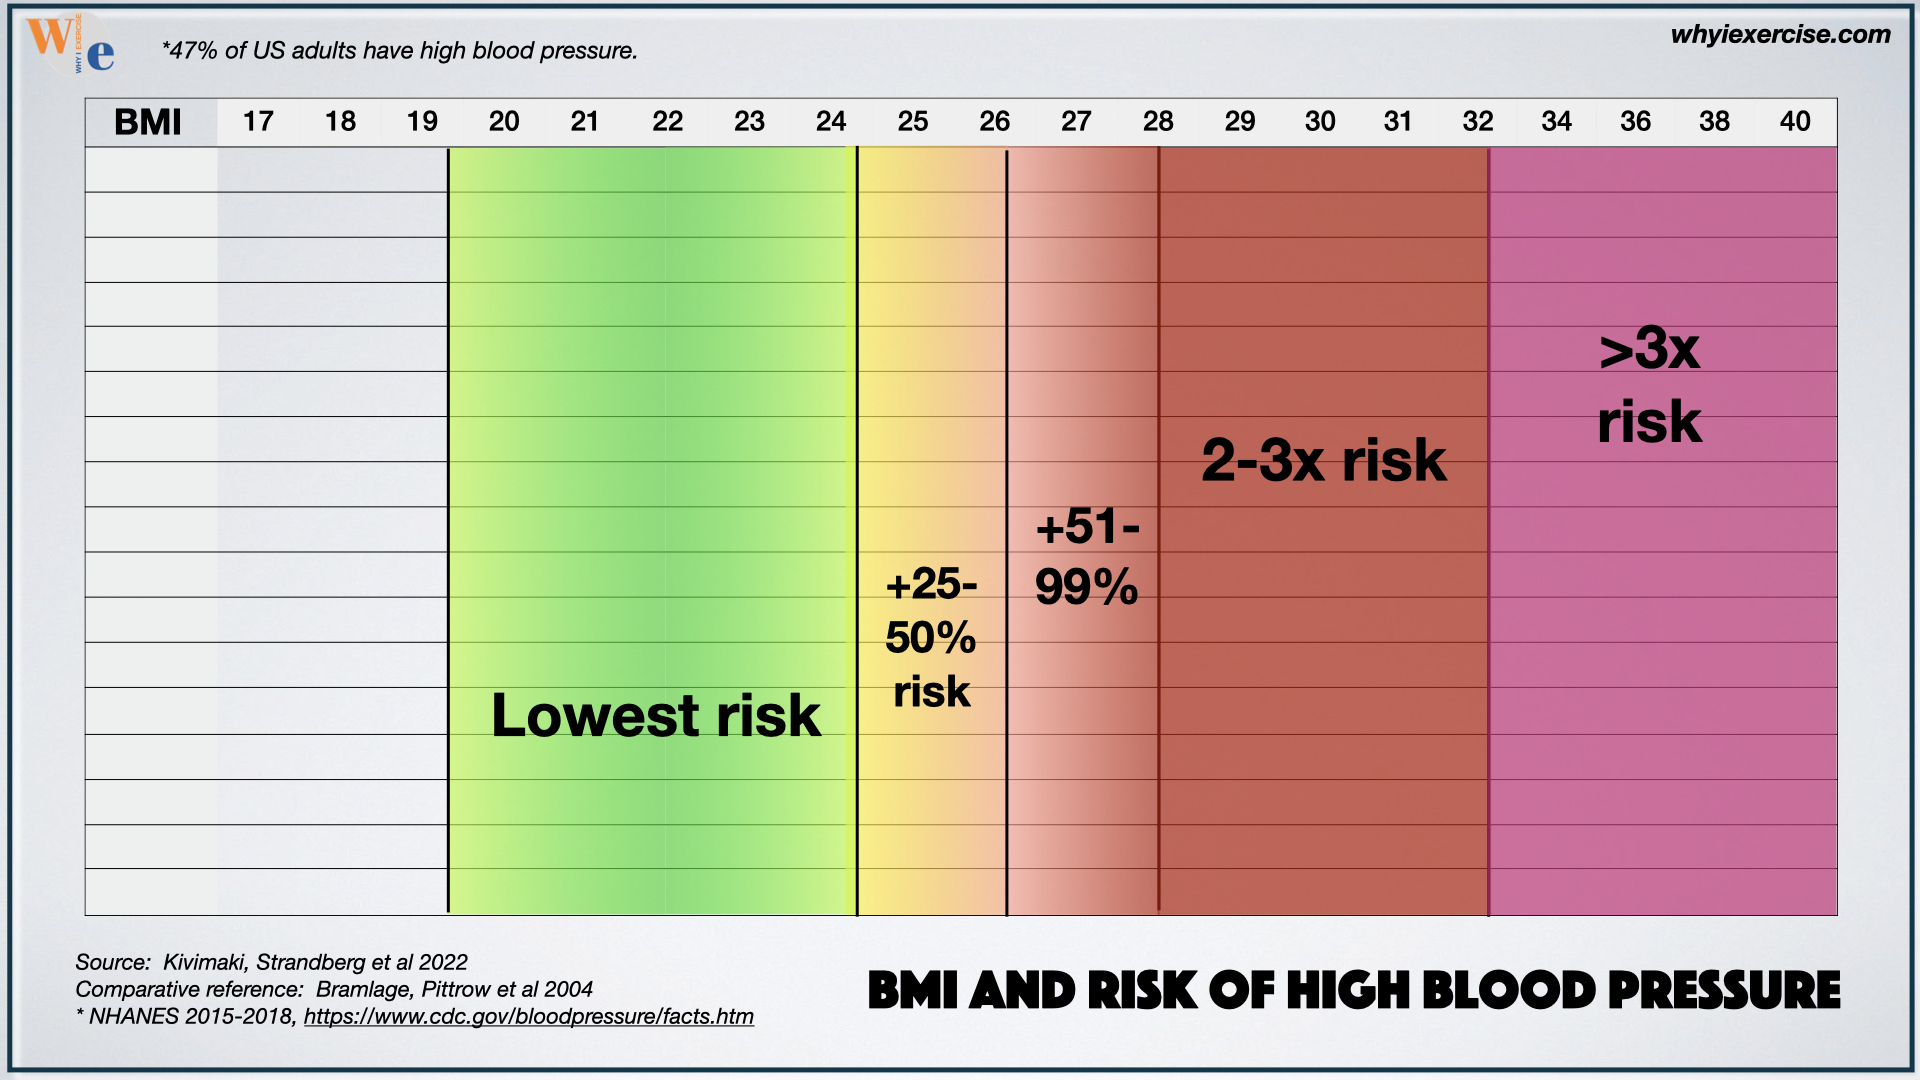 https://www.whyiexercise.com/images/body-mass-index-risk-of-high-blood-pressure.jpg